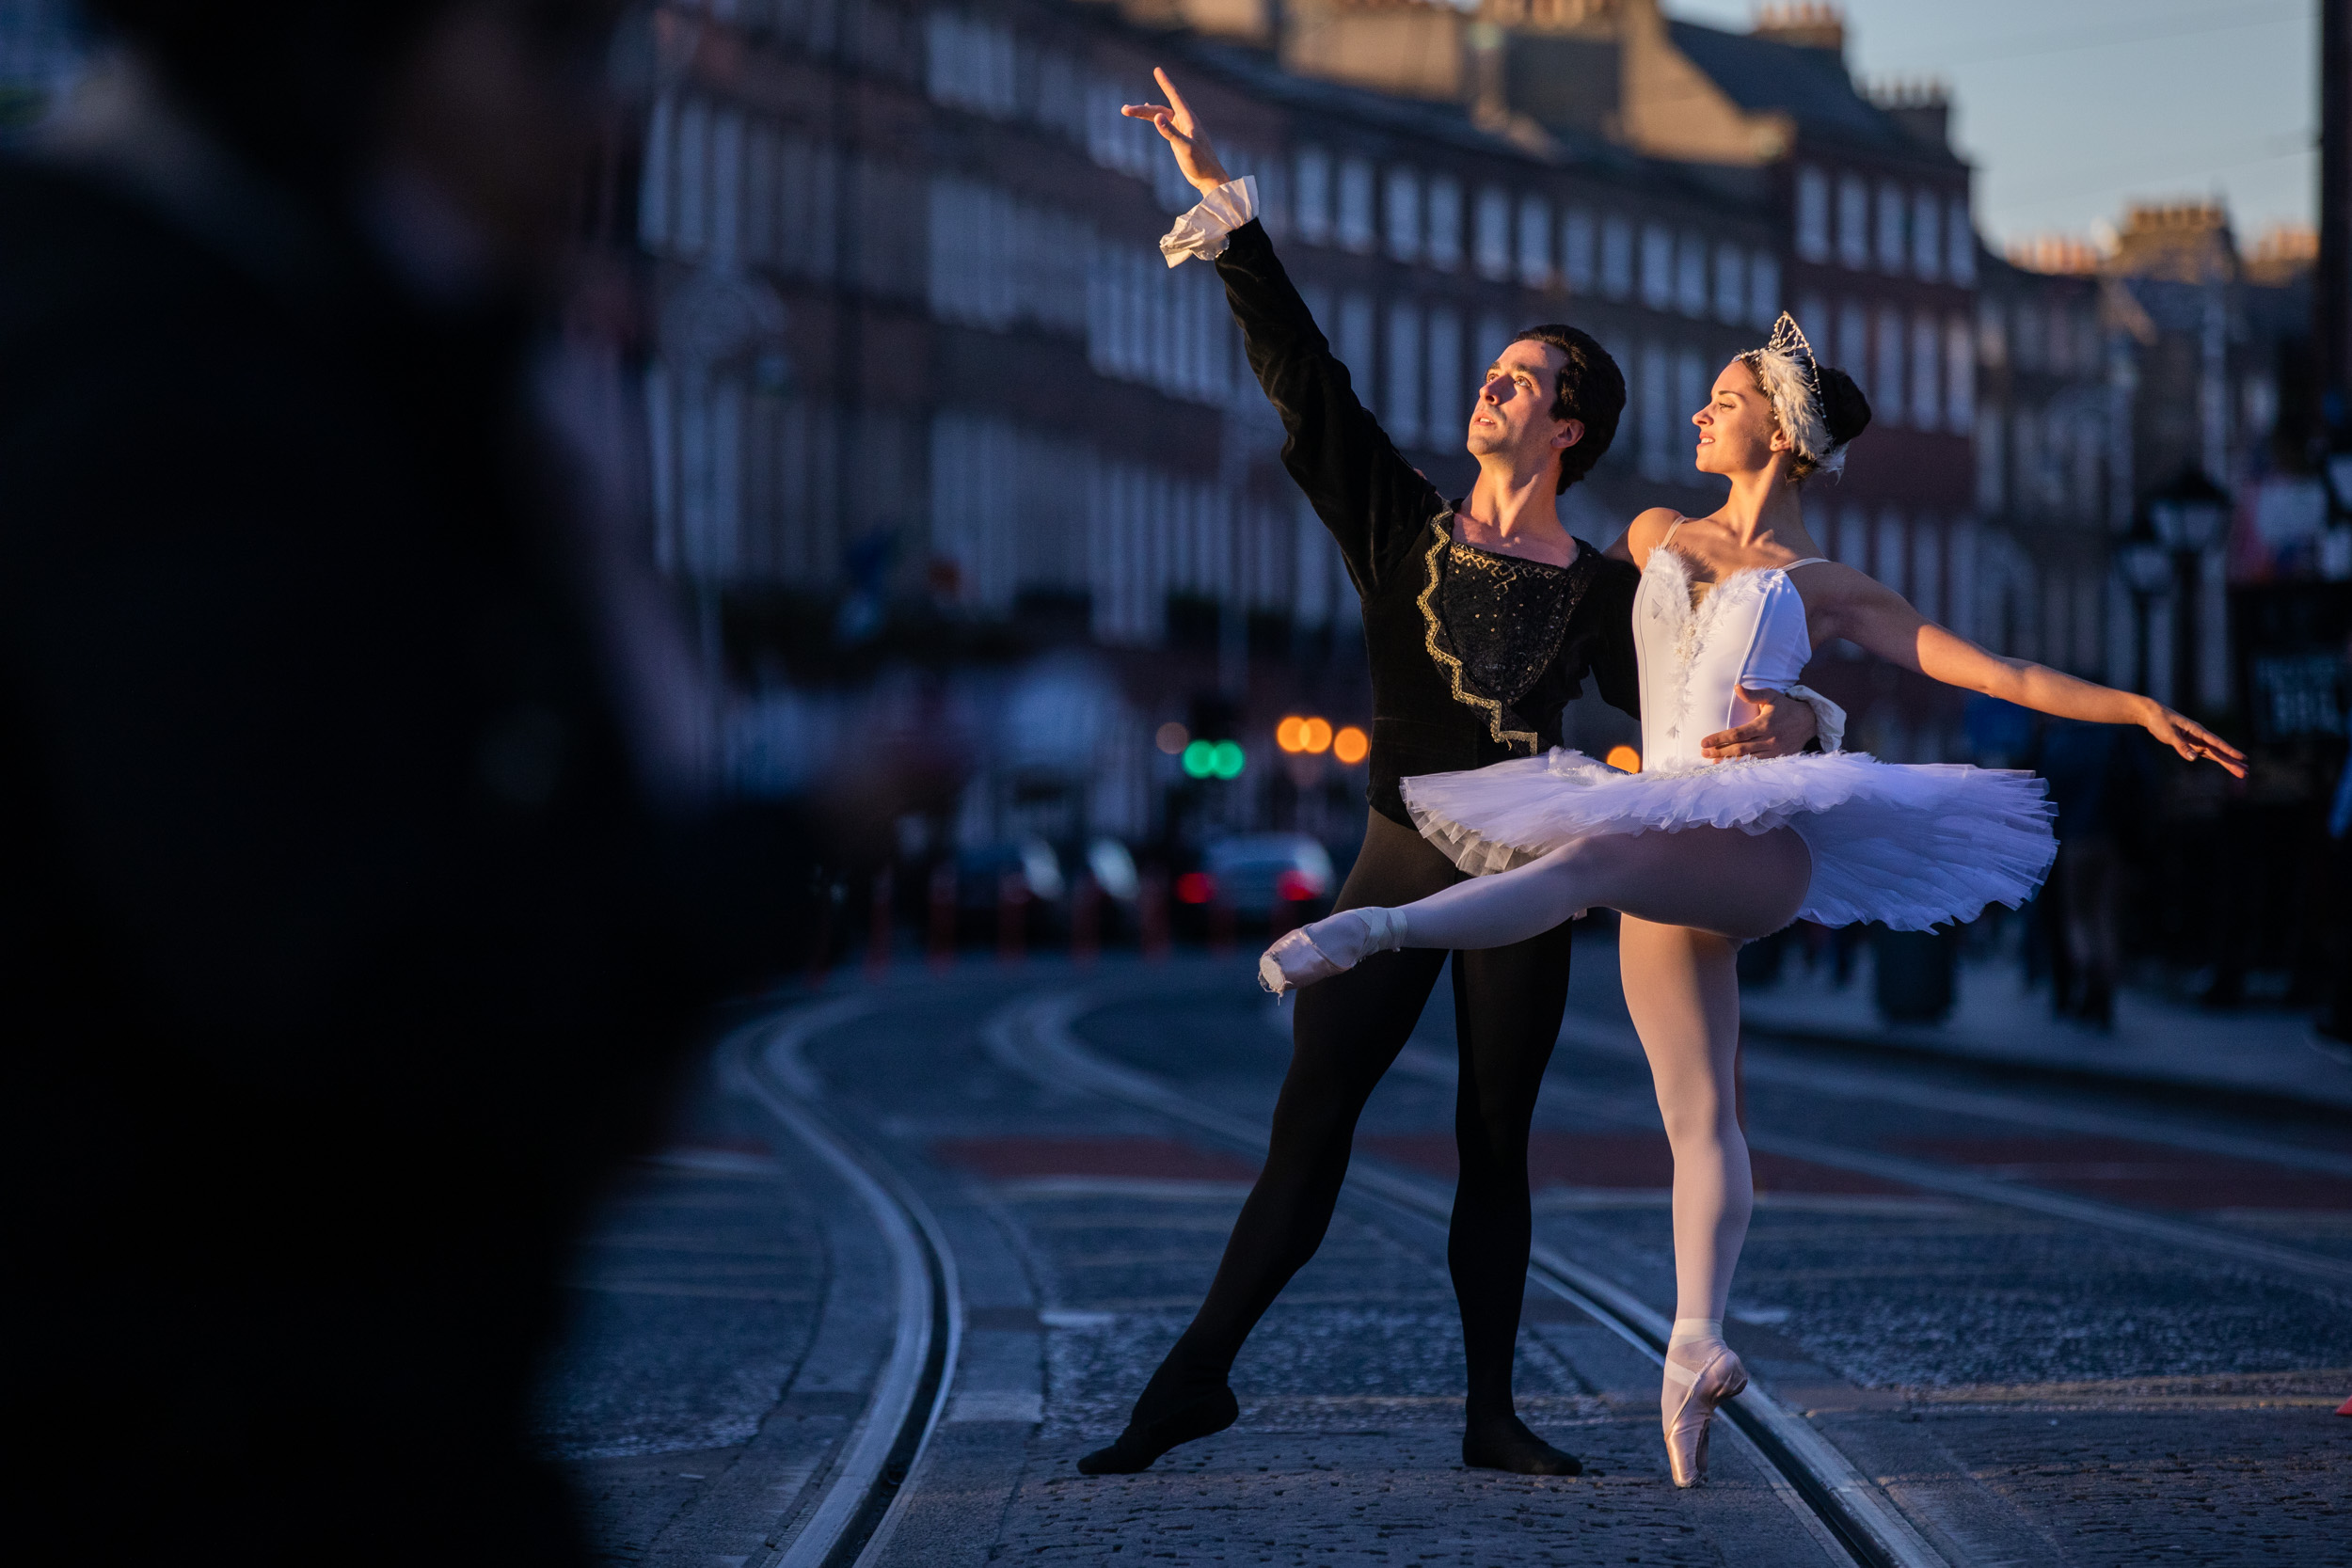 EY Ireland announces corporate sponsorship of Ballet Ireland's tour of Swan Lake. Photo by Naoise Culhane.